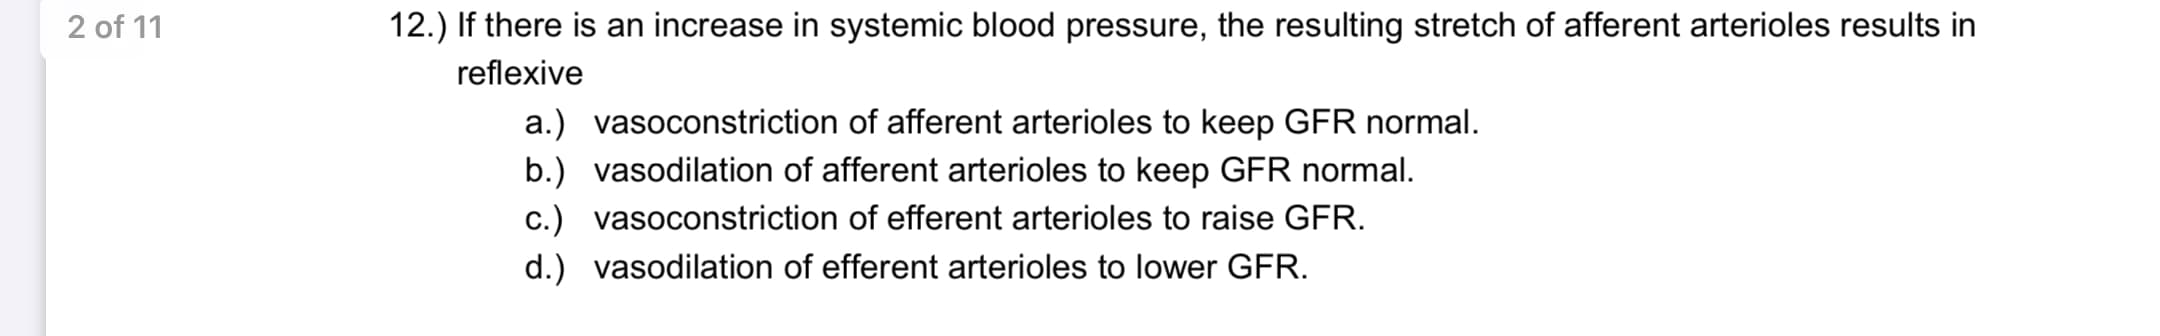 12.) If there is an increase in systemic blood pressure, the resulting stretch of afferent arterioles results in
reflexive
a.) vasoconstriction of afferent arterioles to keep GFR normal.
b.) vasodilation of afferent arterioles to keep GFR normal.
c.) vasoconstriction of efferent arterioles to raise GFR.
d.) vasodilation of efferent arterioles to lower GFR.
